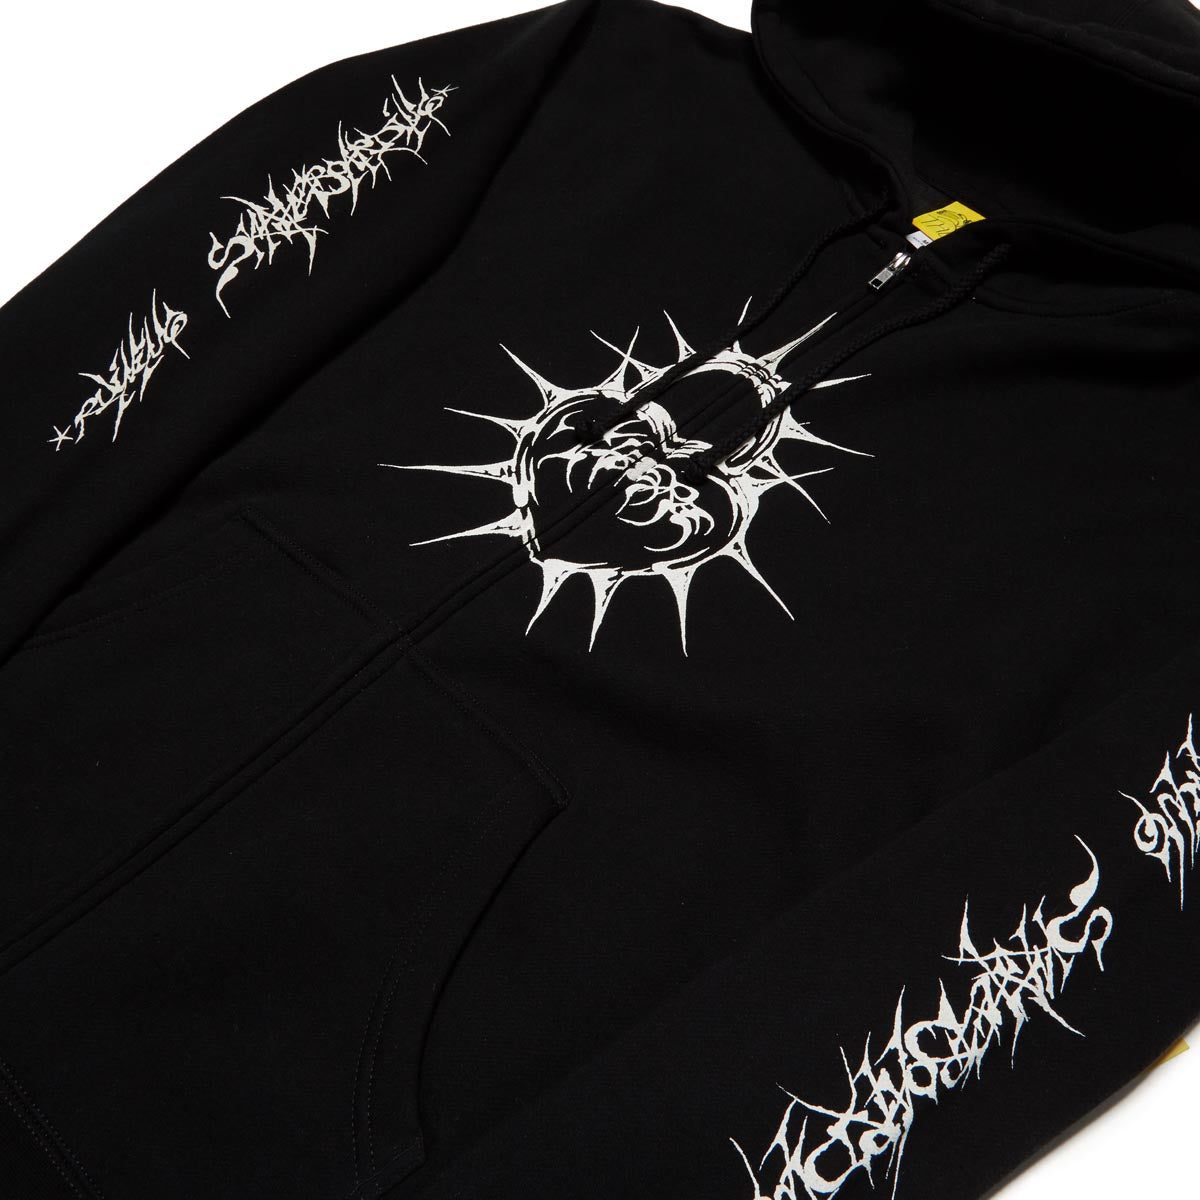 There Heart Sleeve Hoodie - Black/White image 2